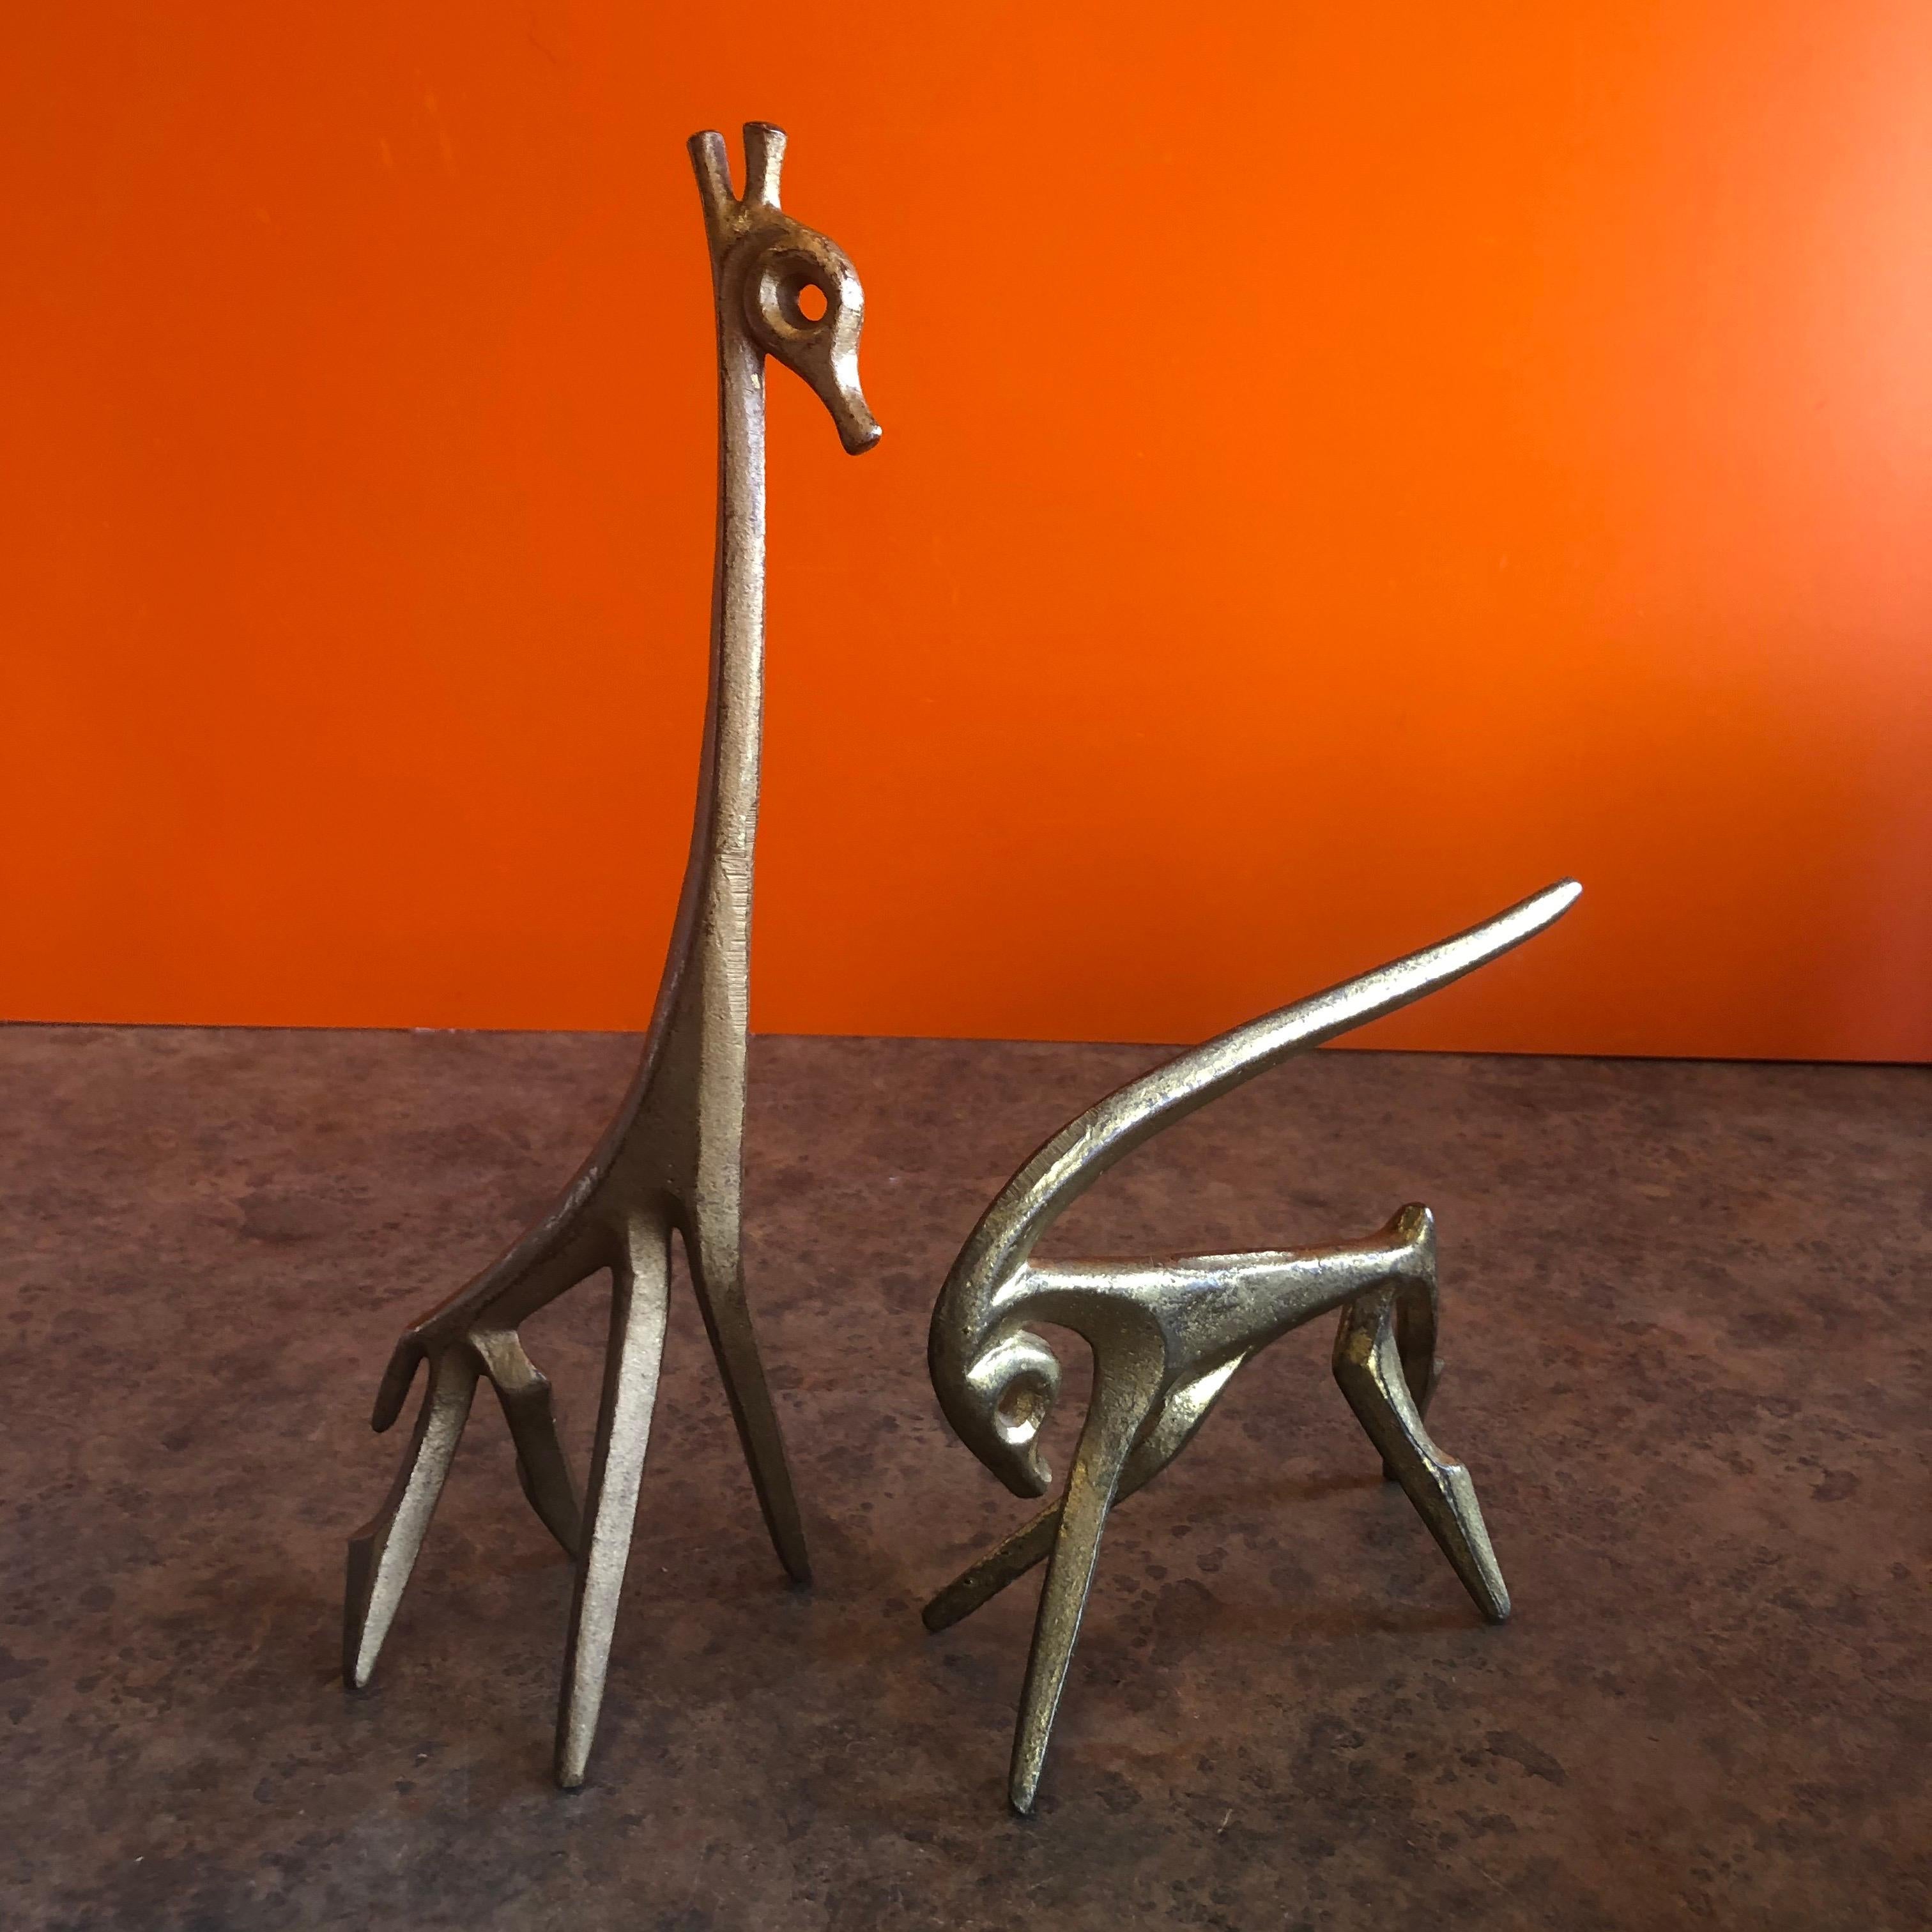 Pair of simple and elegant figurative patinated bronze sculptures of a giraffe and gazelle by Frederic Weinberg, circa 1950s. The Minimalist and modern sculptures have a wonderful vintage patina and are signed 